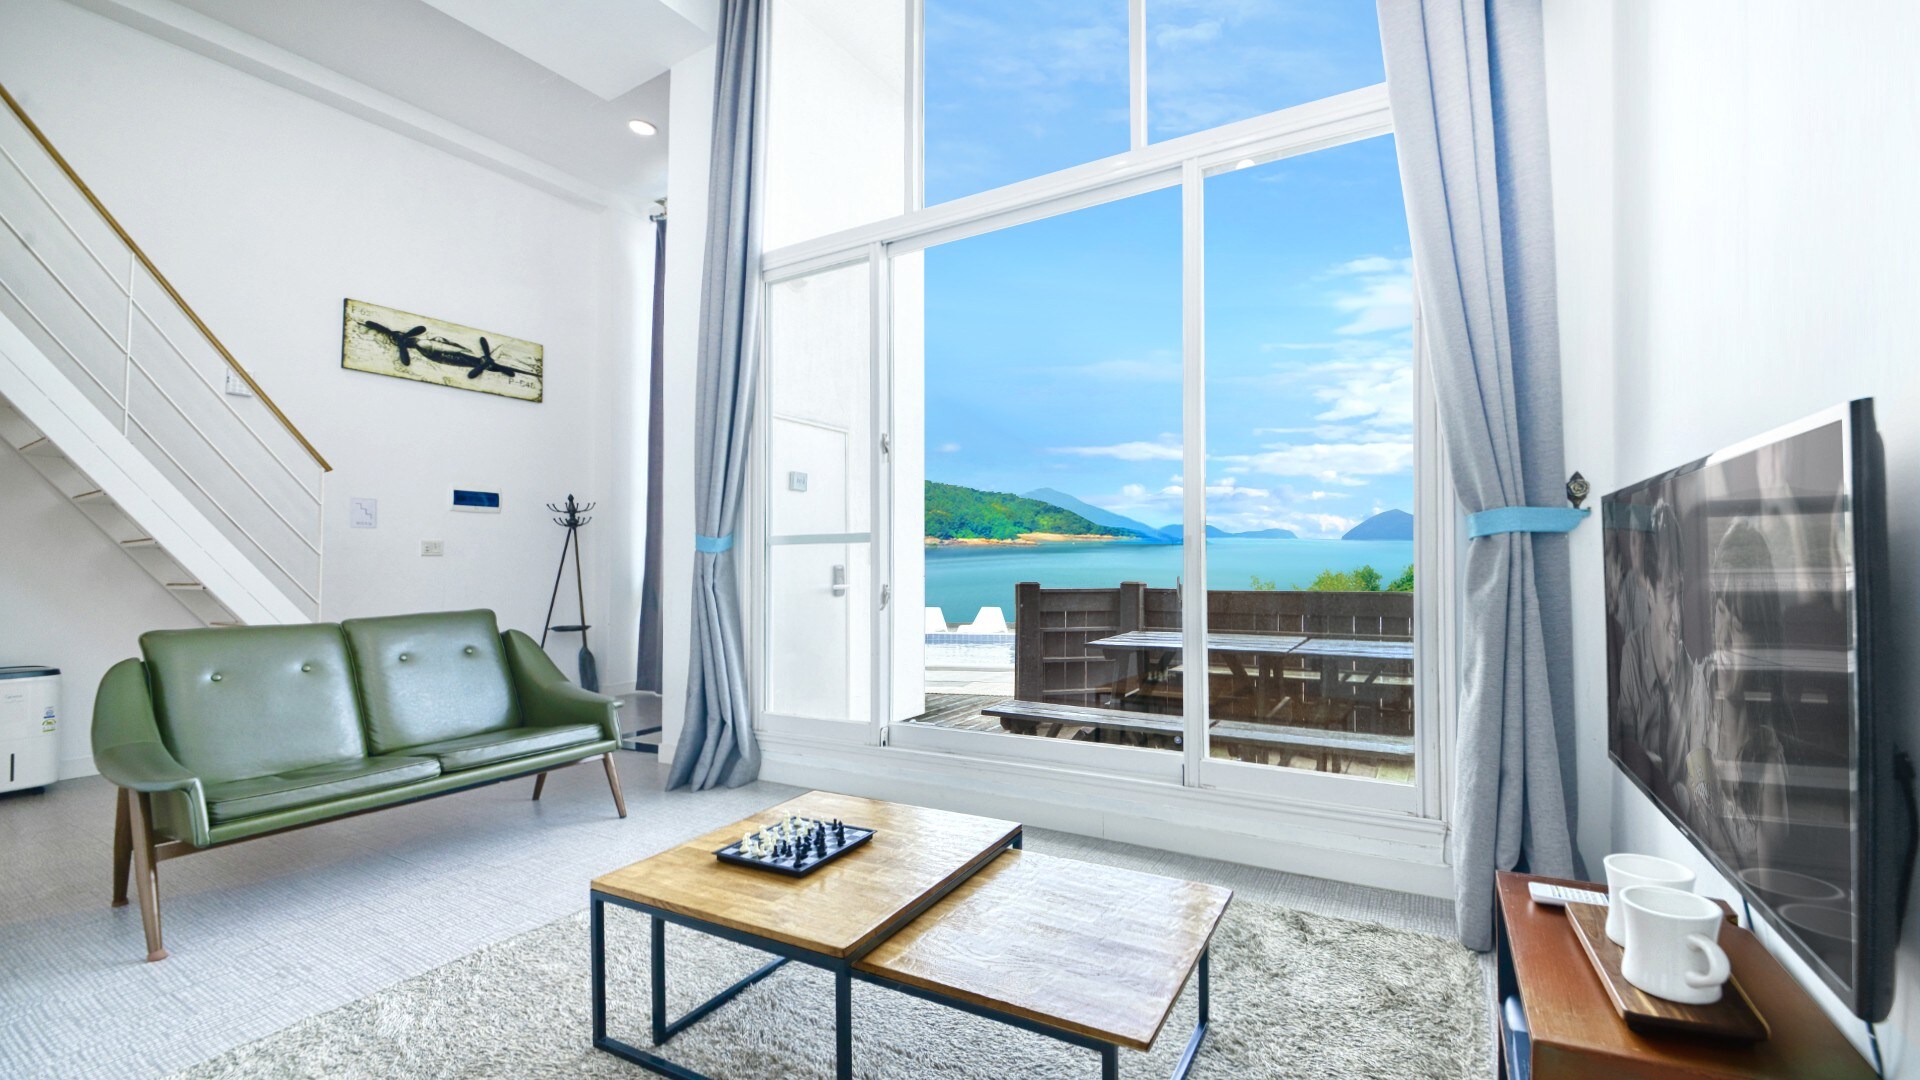 Property Image 1 -  Lovely Yeosu ocean view duplex home - Family 1